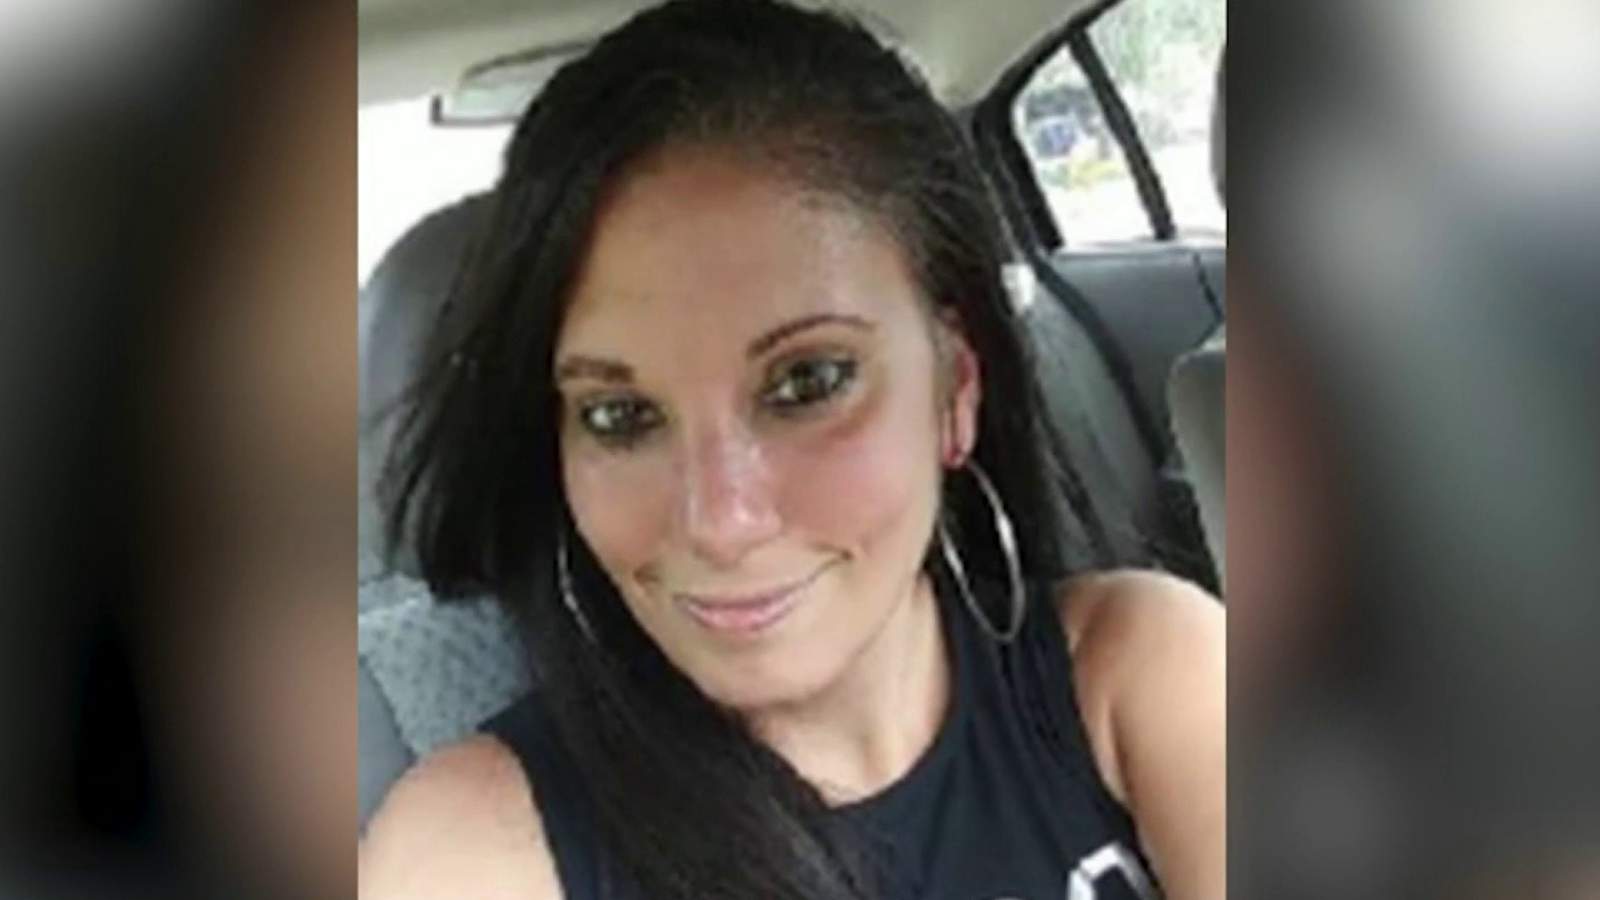 Vigil planned for missing mother who was found dead